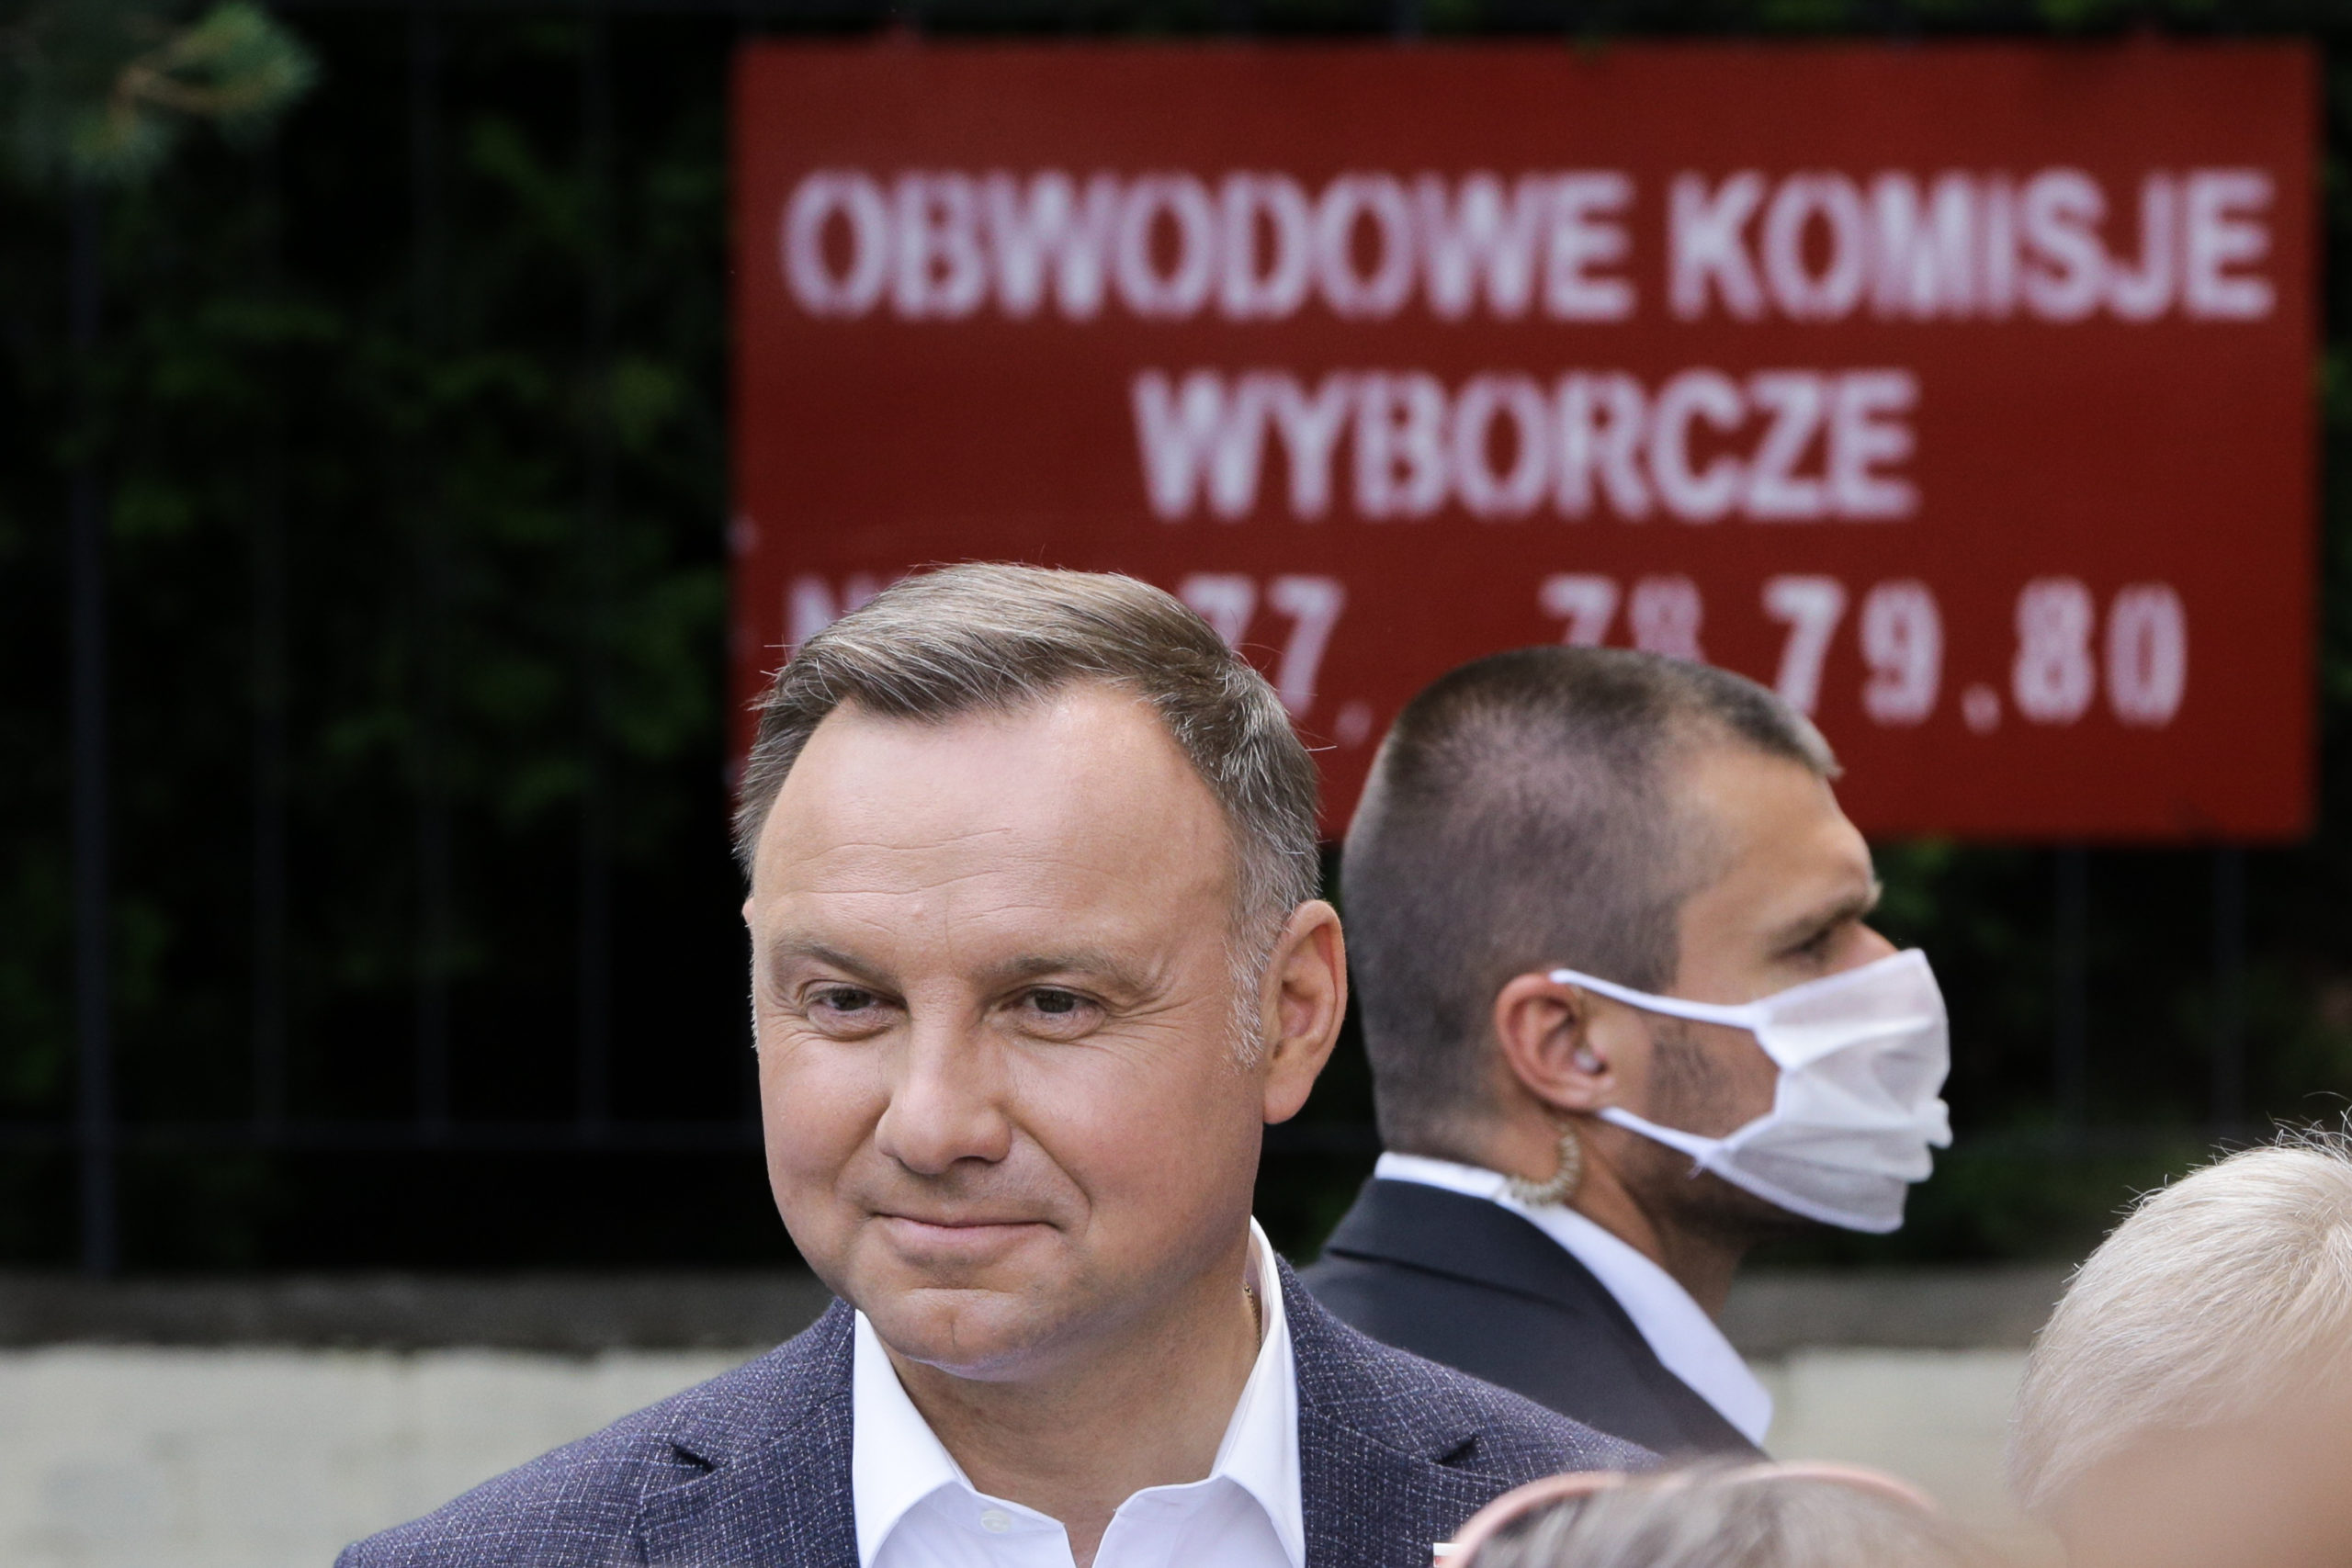 President of Poland, Andrzej Duda seen after voting.